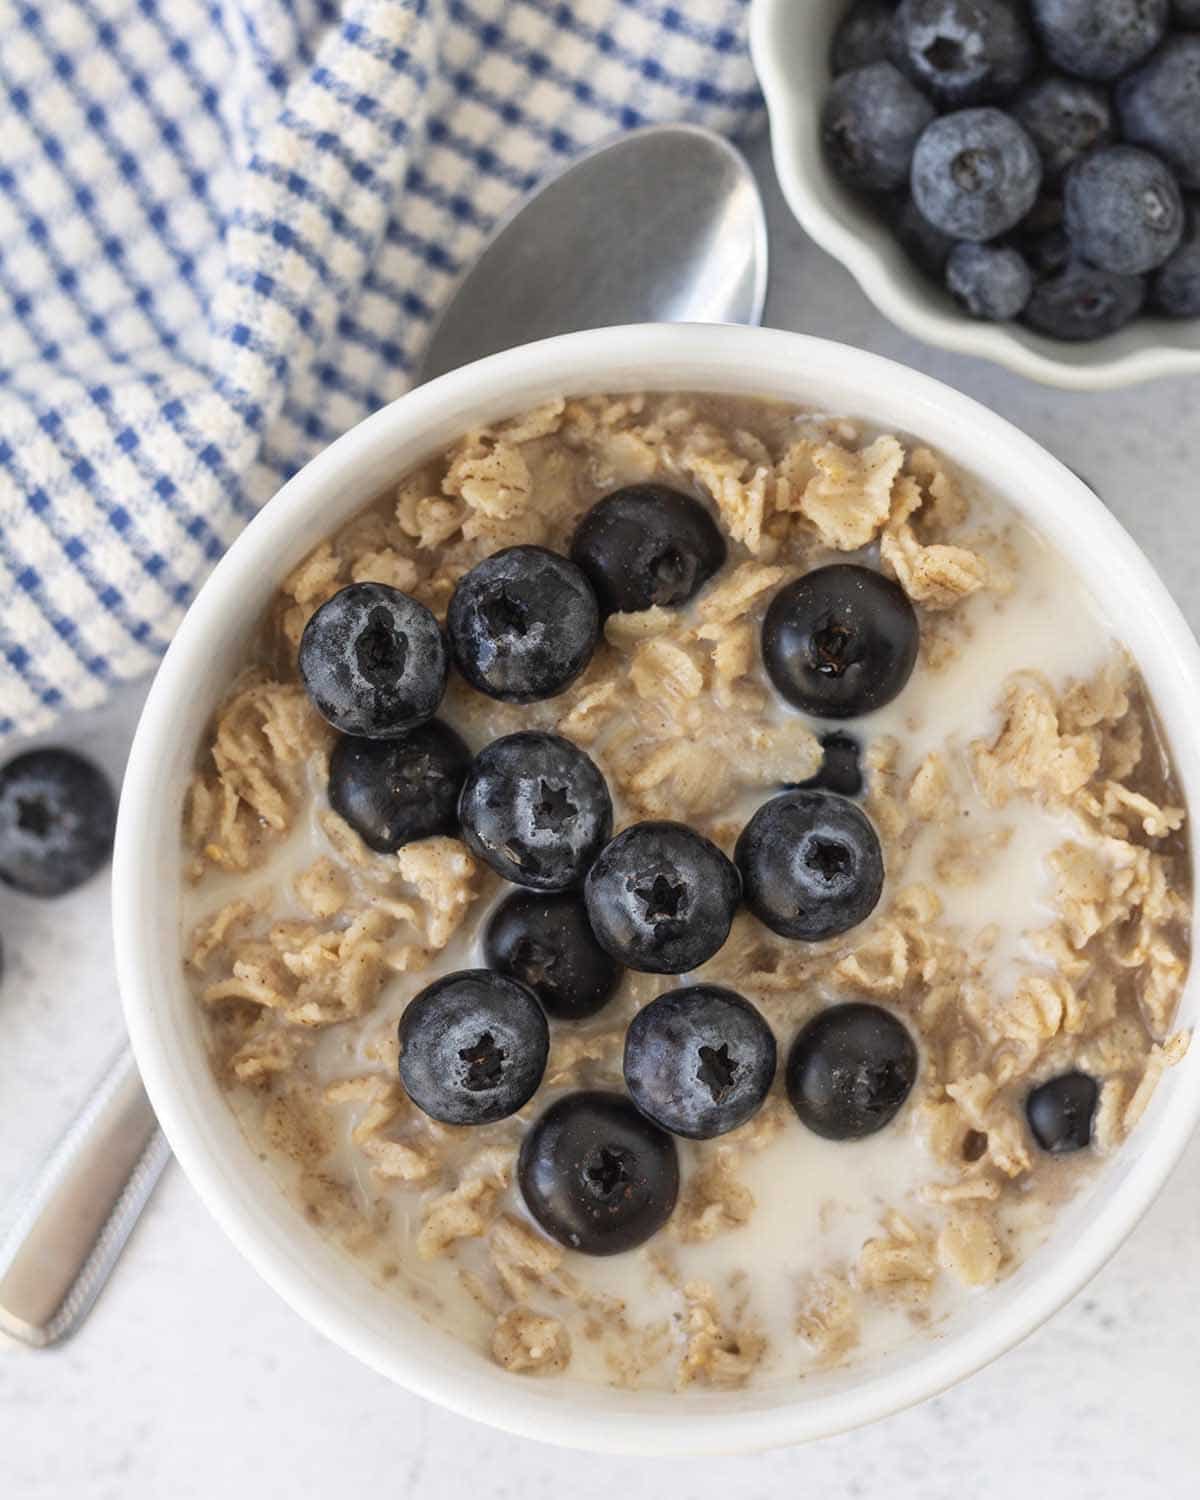 An overhead shot showing a bowl of blueberry cinnamon oatmeal.